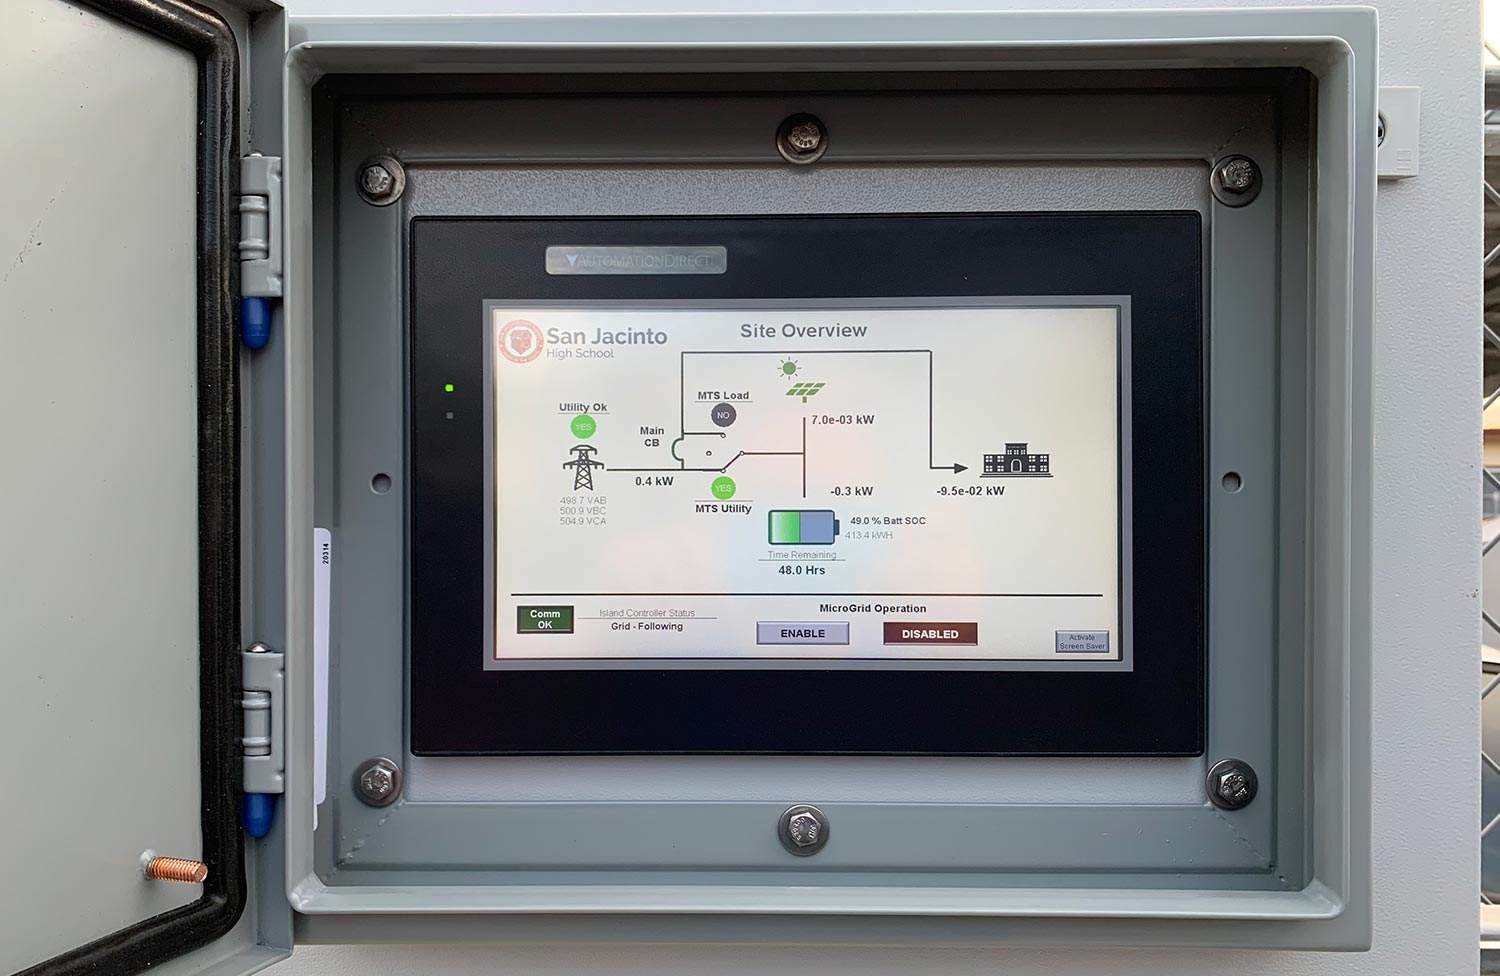 Digital display showing microgrid status and energy storage levels